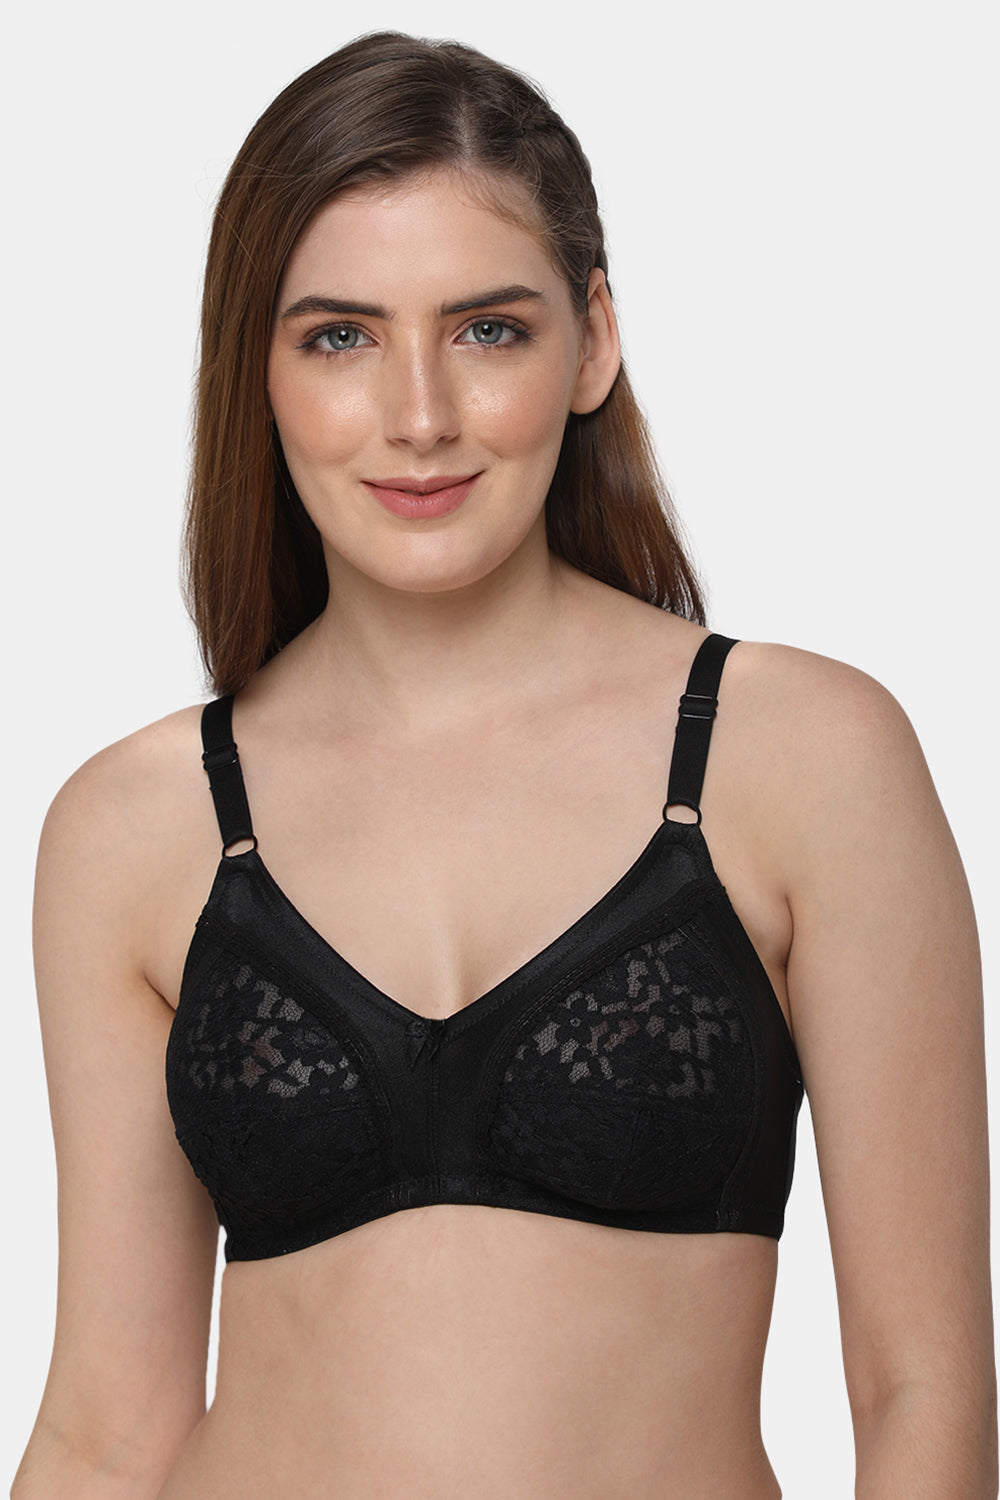 Buy Padded Non-Wired Full Coverage Bridal Bra in Black - Lace